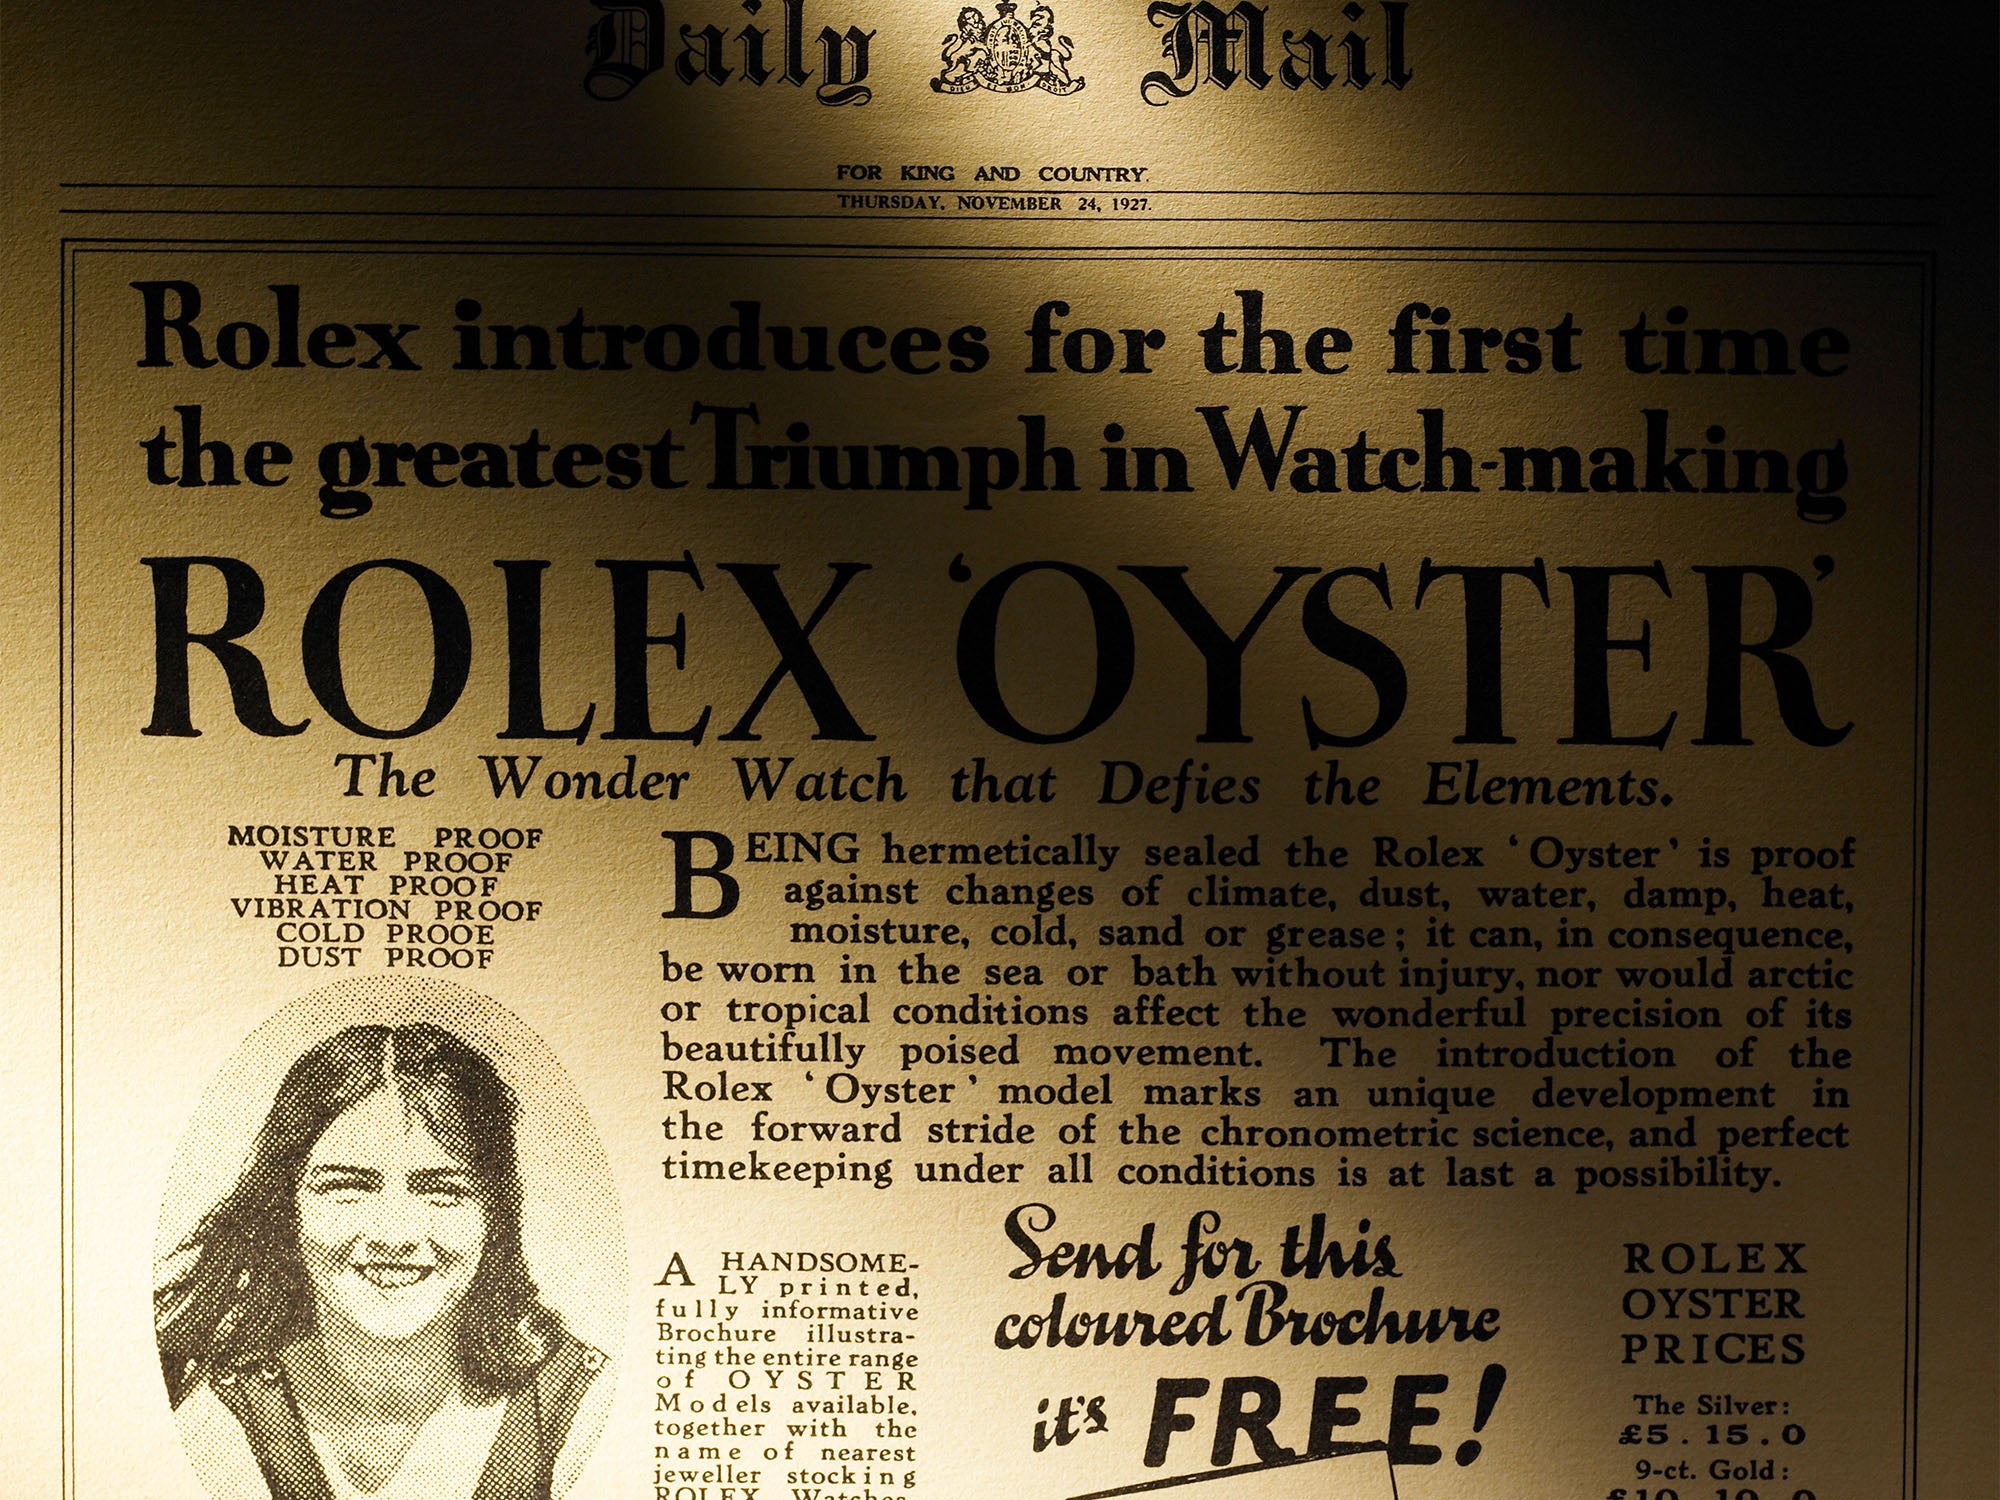 Rolex Oyster - Daily Mail ad